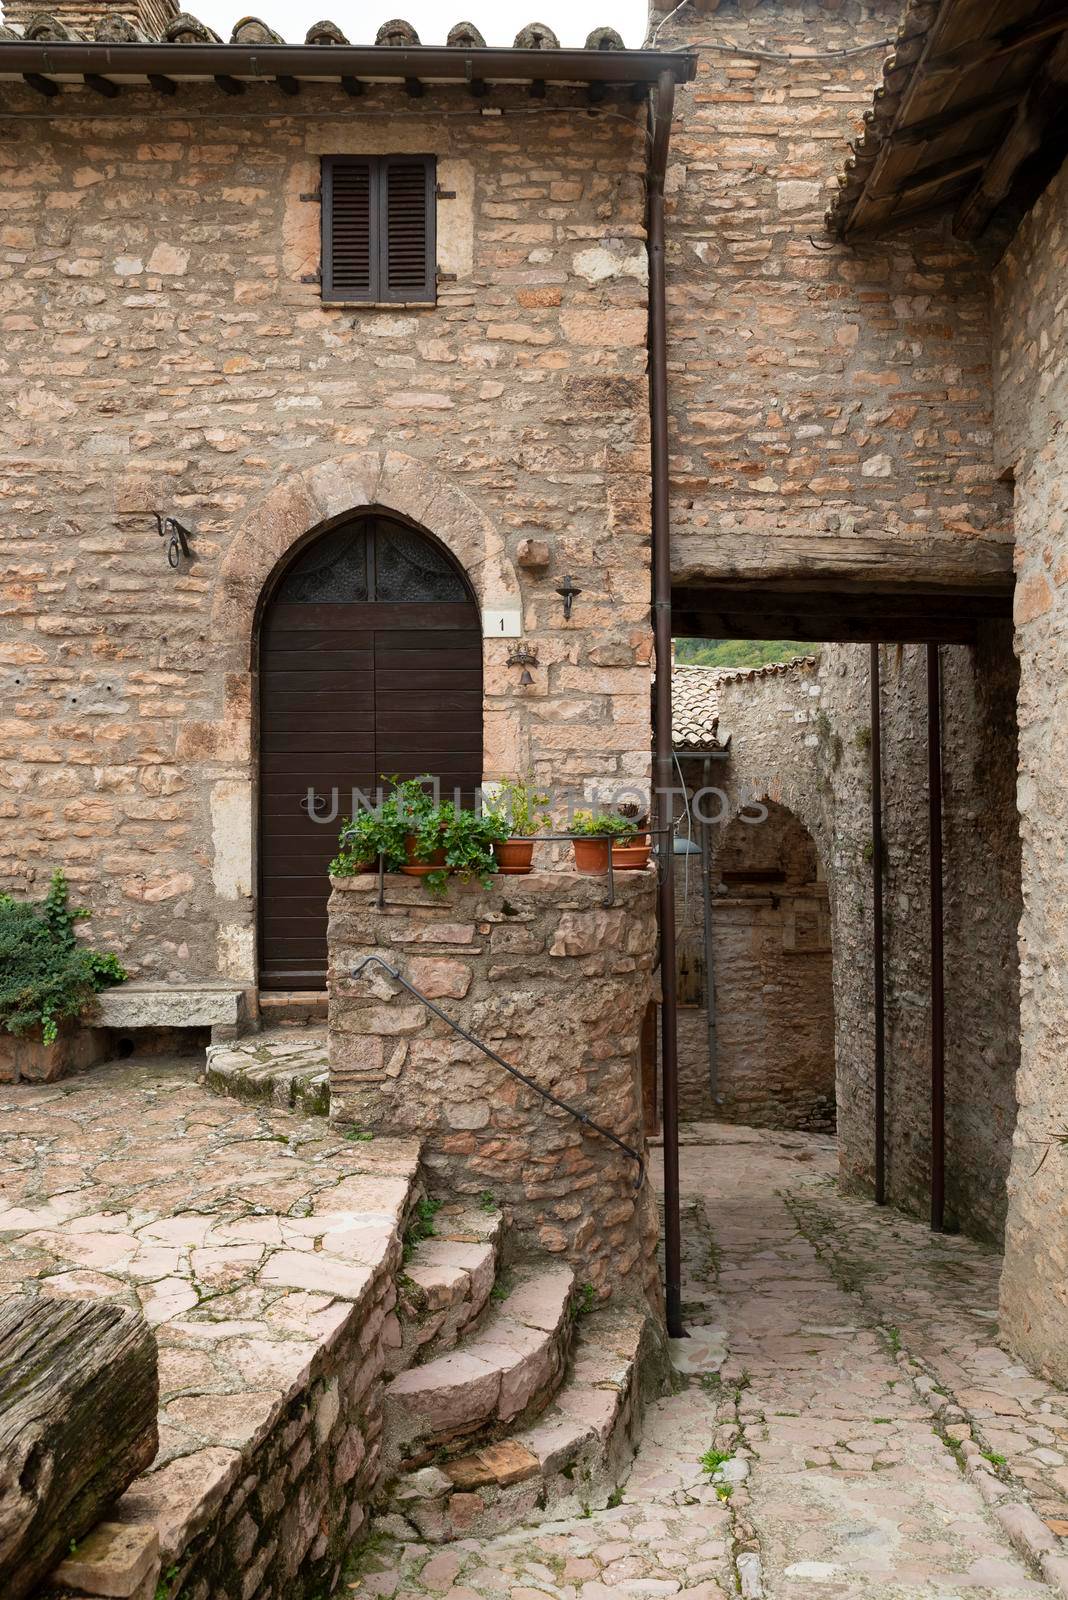 alleys of Macerino, a historic stone town, inhabited only in summer